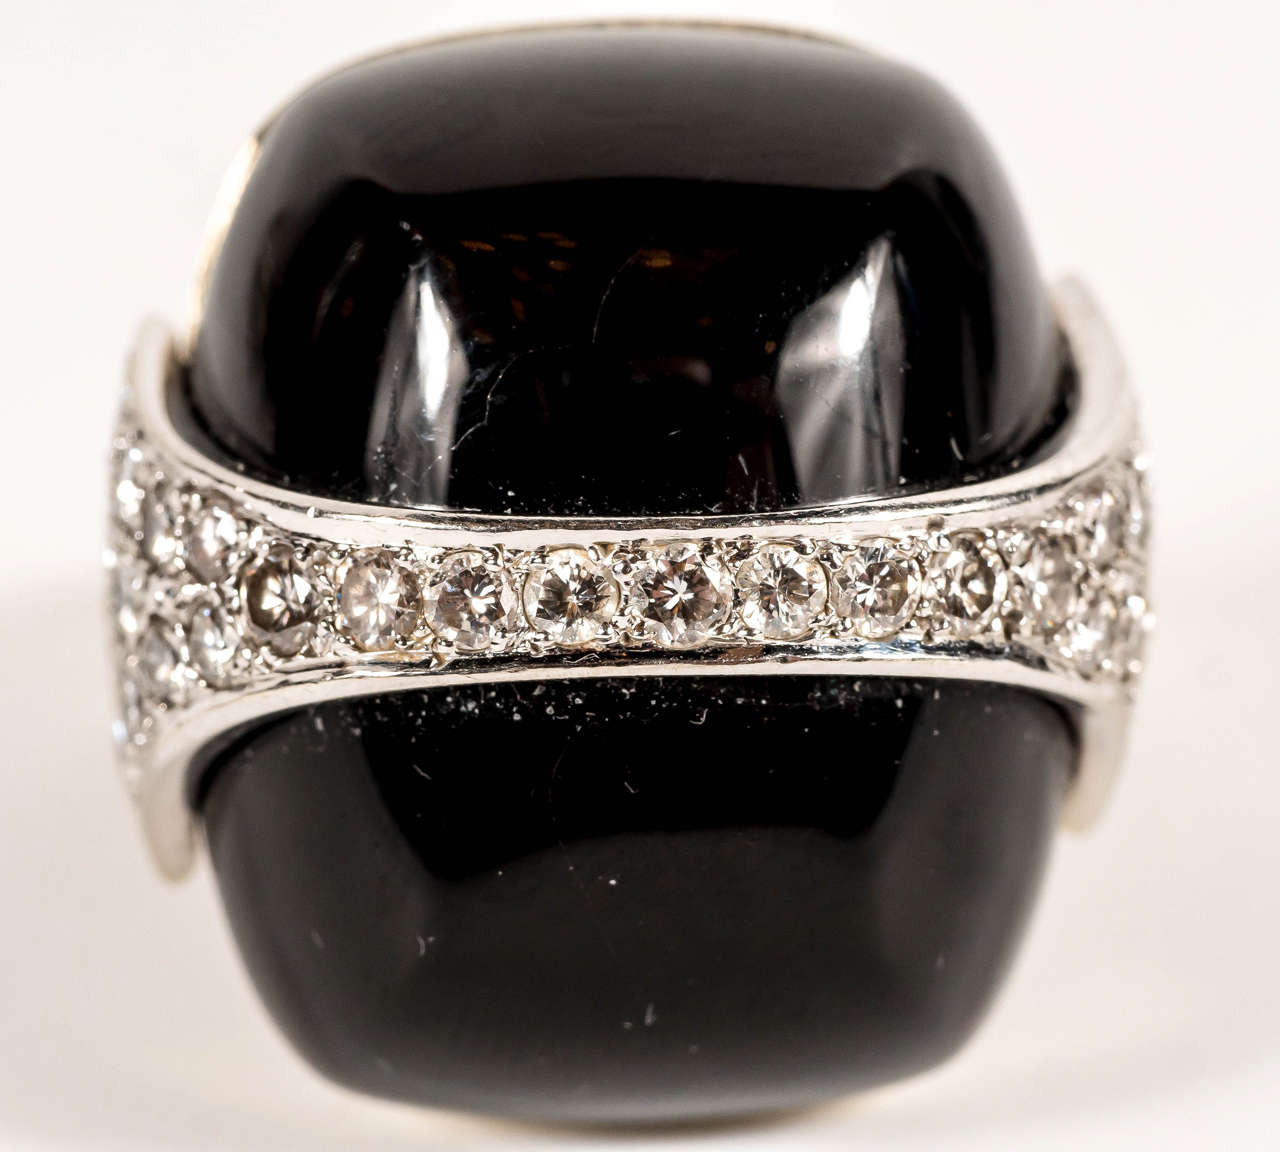 This ring is 18K yellow and white Gold Dome Ring by La Triomph, Set with 1.25 Carats of fine White Diamonds and Buff Cut Onyx . An extremely well made strong and bold geometric designed ring.This rings design is heavily influenced by the Art Deco